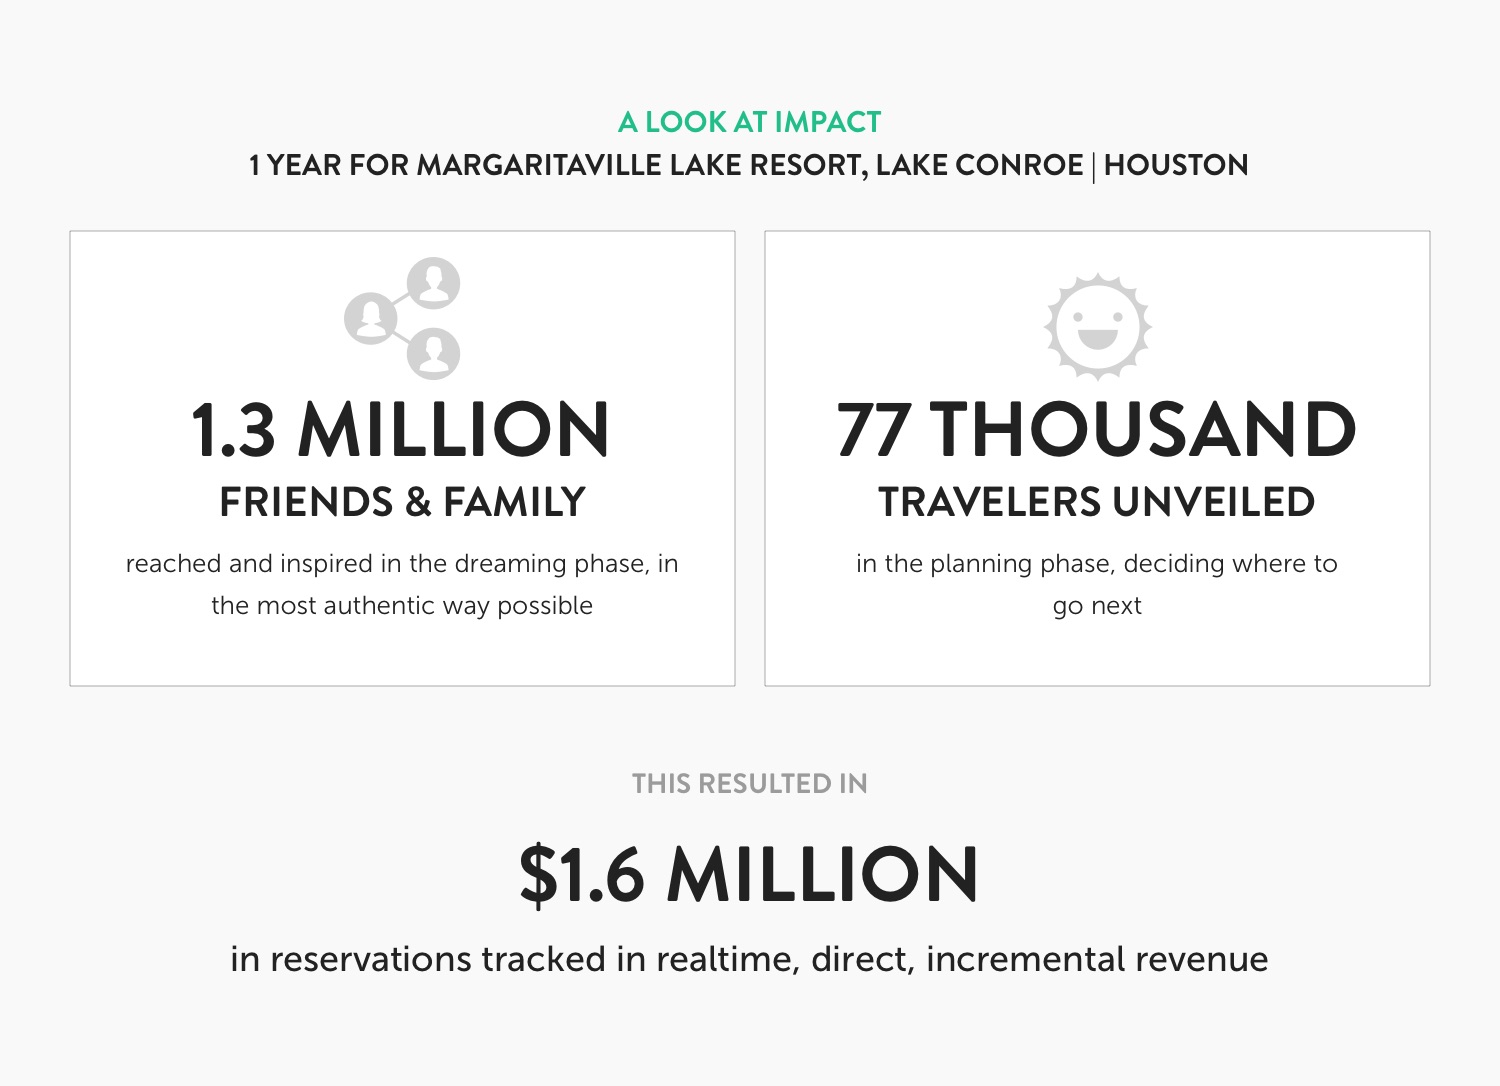 Infographic: A look at Impact, 1 Year for Margaritaville Lake Resort, Lake Conroe Houston. 1,300,000 friends & family reached and inspired in the dreaming phase, in the most authentic way possible; 77,000 travelers unveiled in the planning phase, deciding where to go next; This resulted in $1,600,000 in reservations tracked in real time to direct, incremental revenue